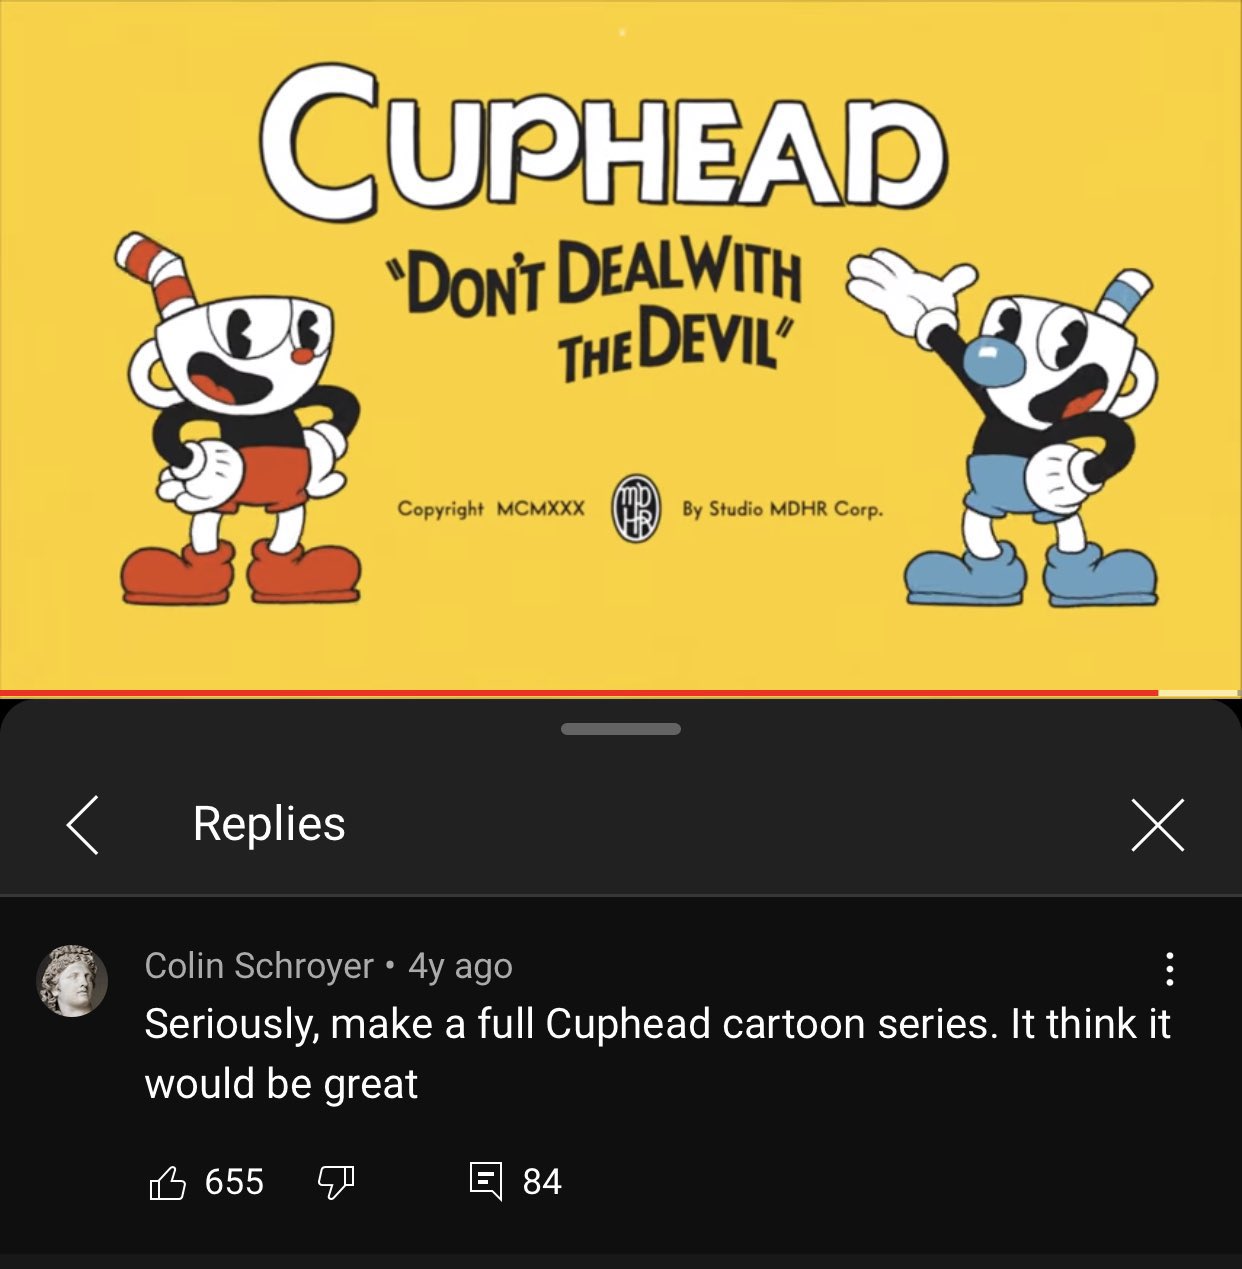 Posts that aged well - game xbox one cuphead - Cuphead "Don'T Dealwith The Devil Copyright Mcmxxx mb Vb By Studio Mdhr Corp. Replies Colin Schroyer 4y ago Seriously, make a full Cuphead cartoon series. It think it would be great B 655 84